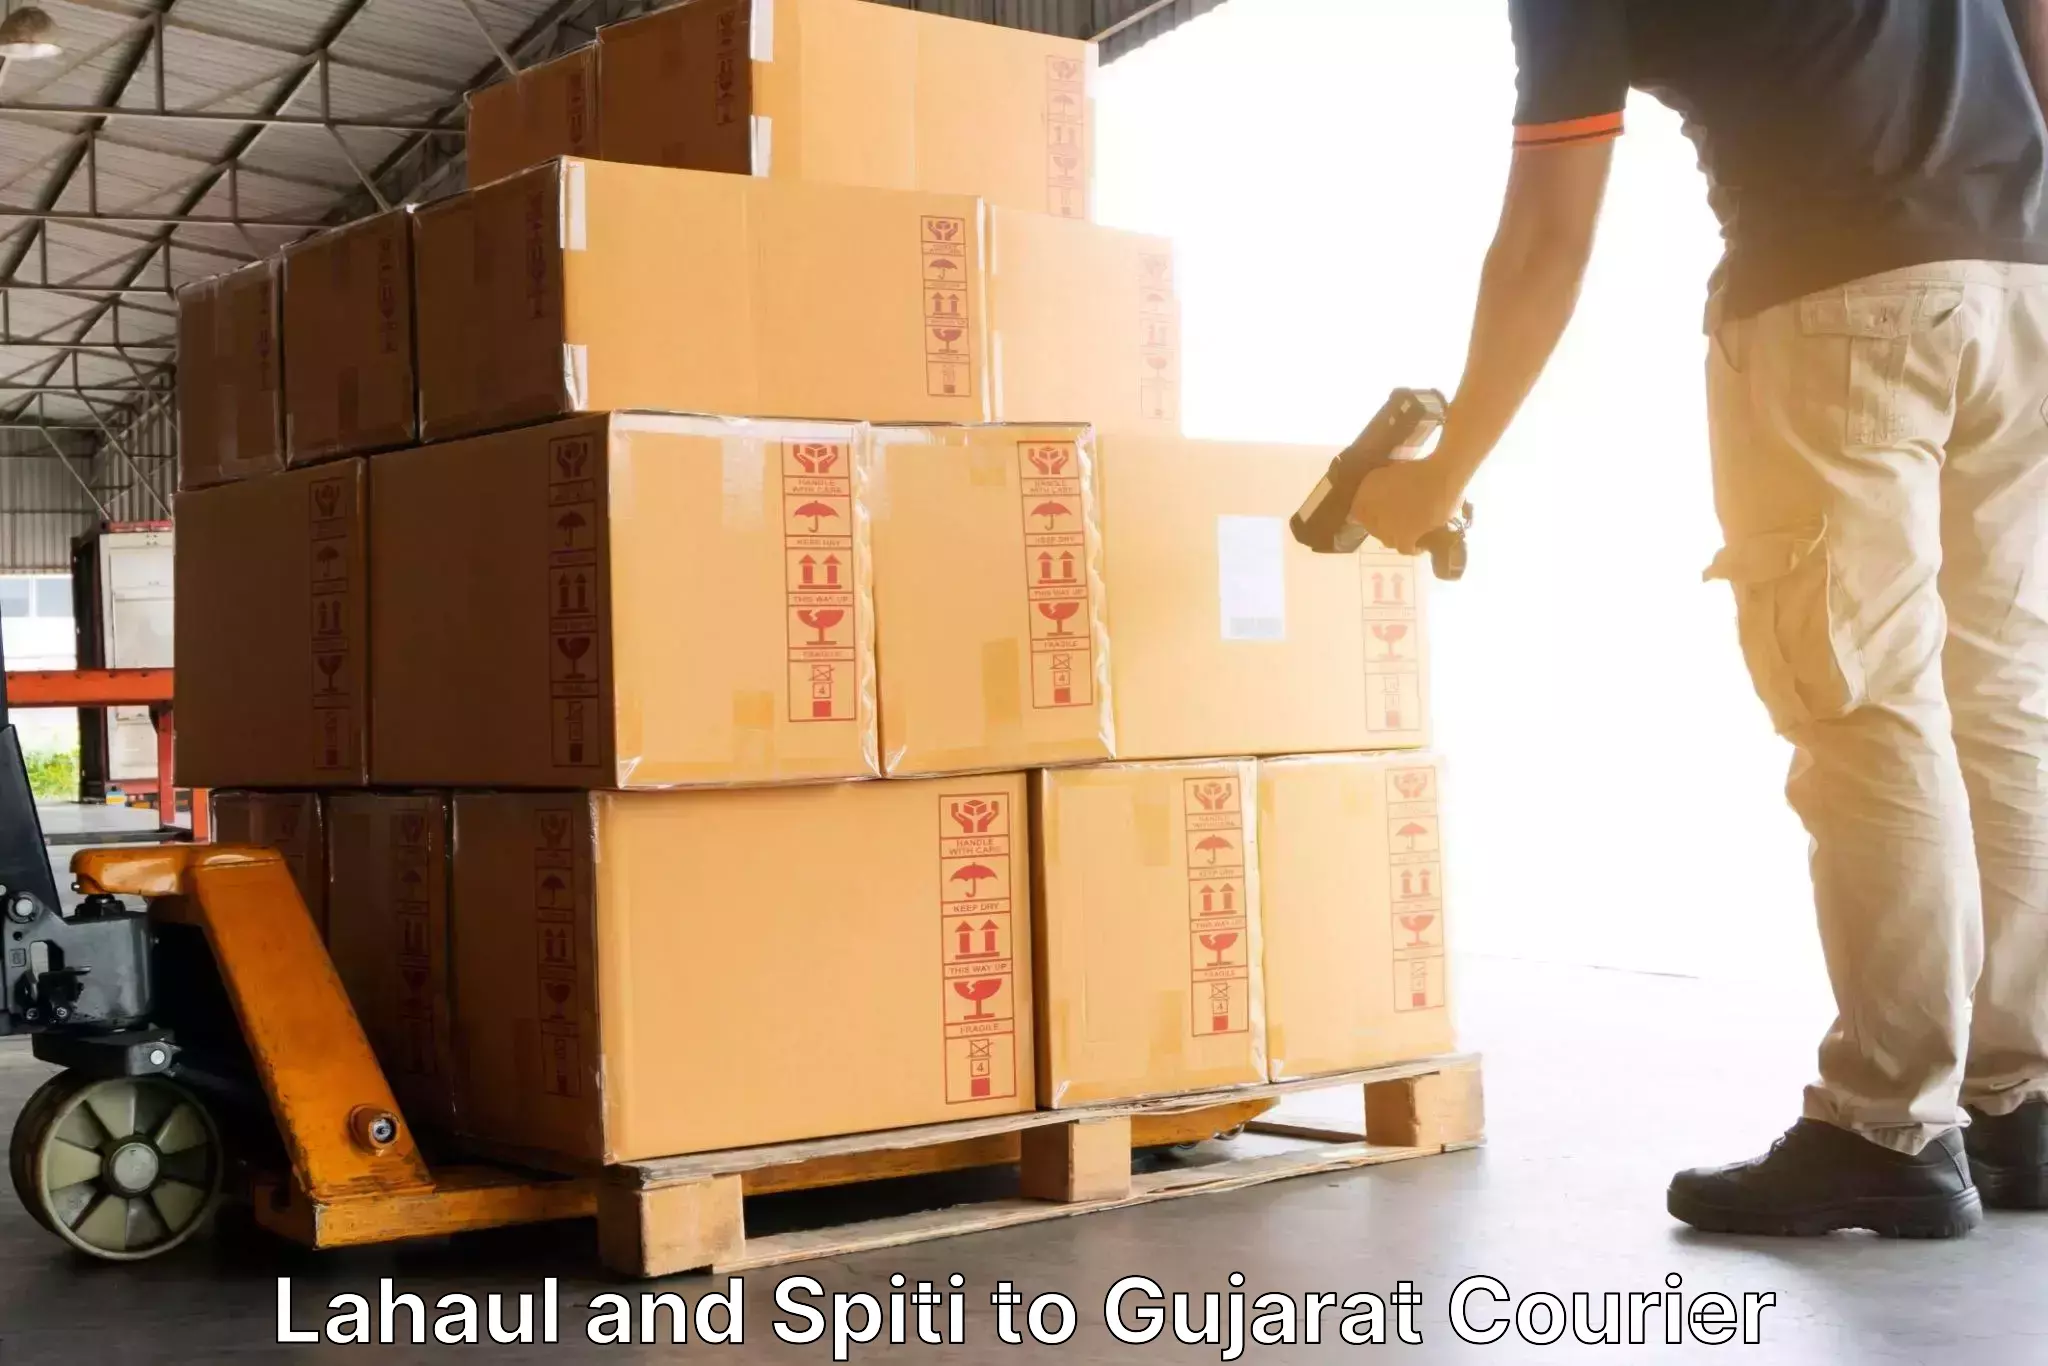 Flexible delivery scheduling in Lahaul and Spiti to Gujarat